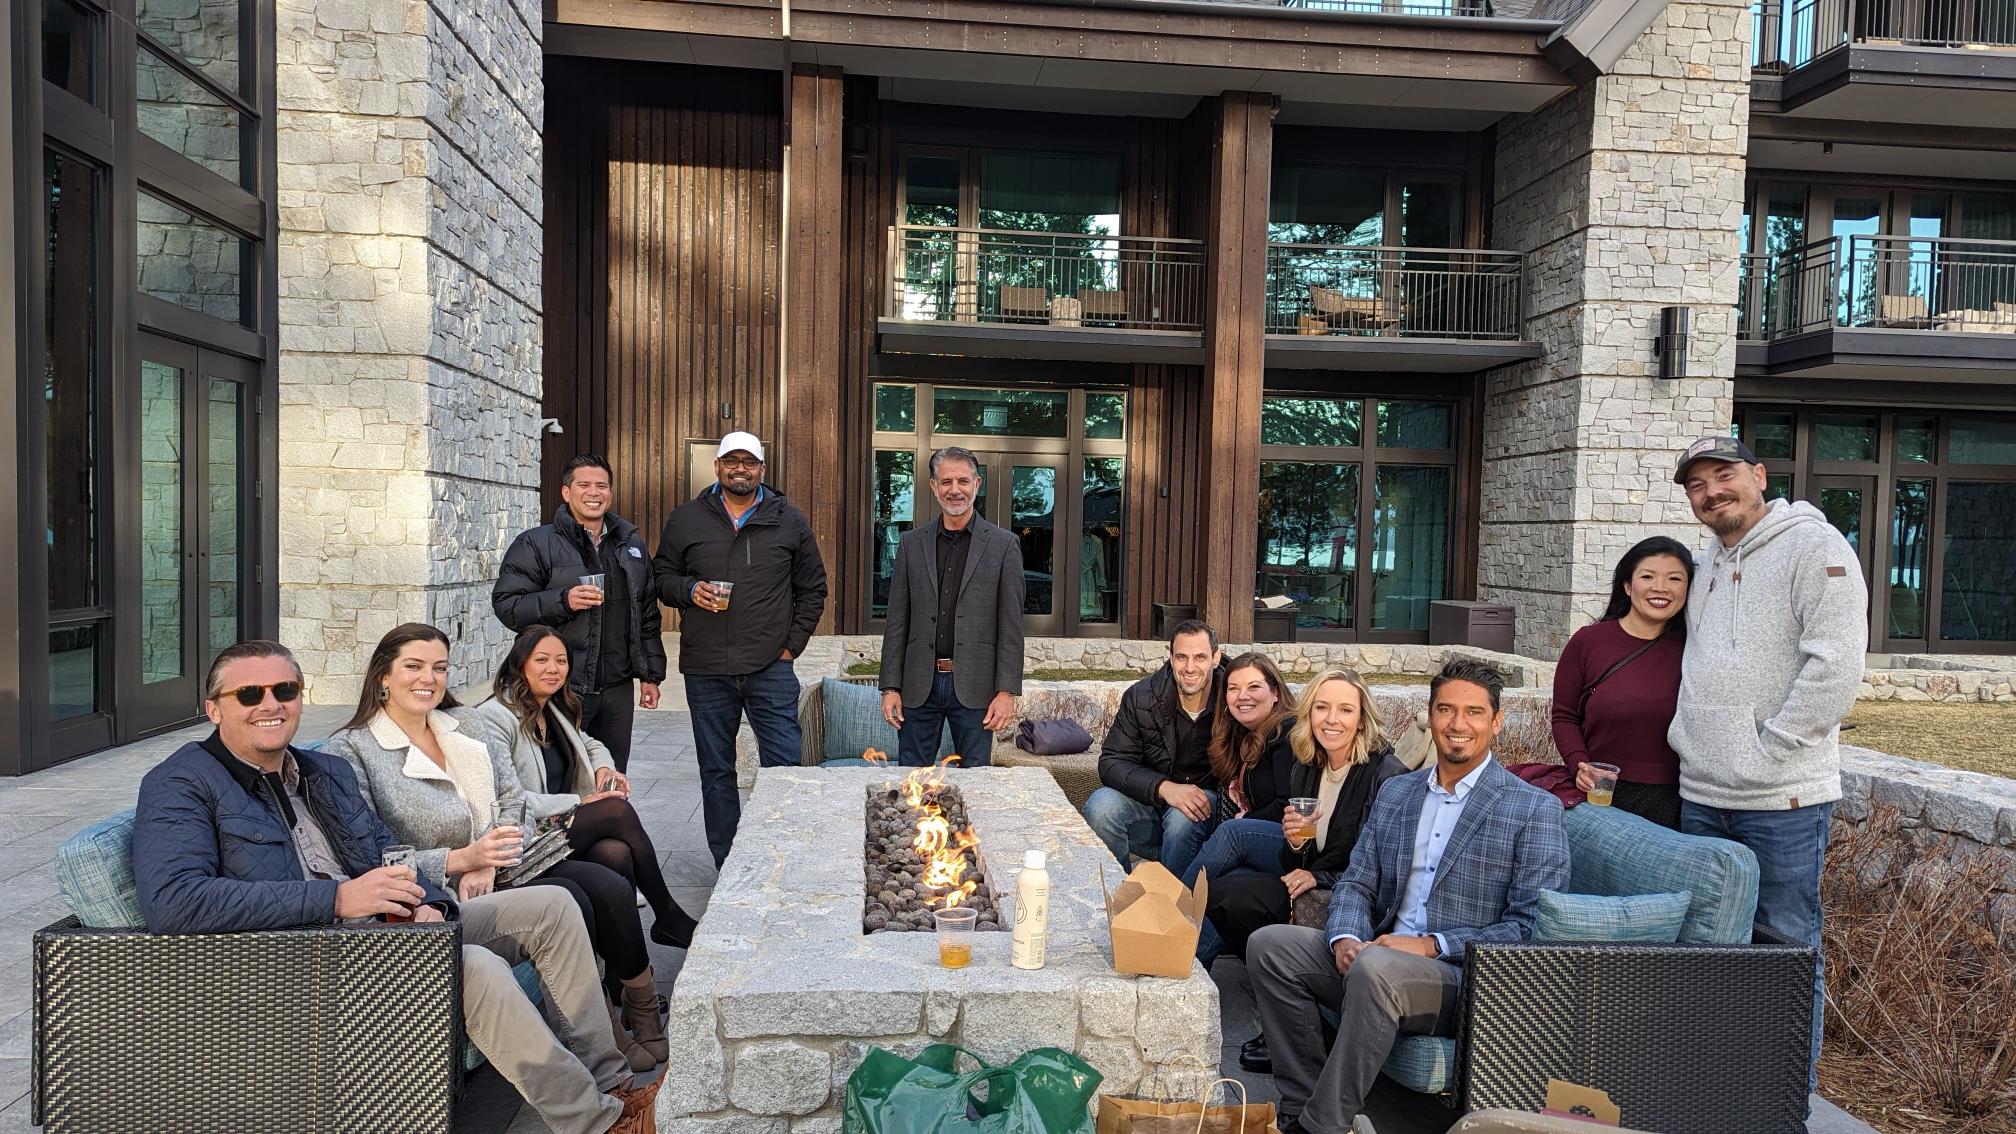 A group of Technossus employees sit around a fire outside.